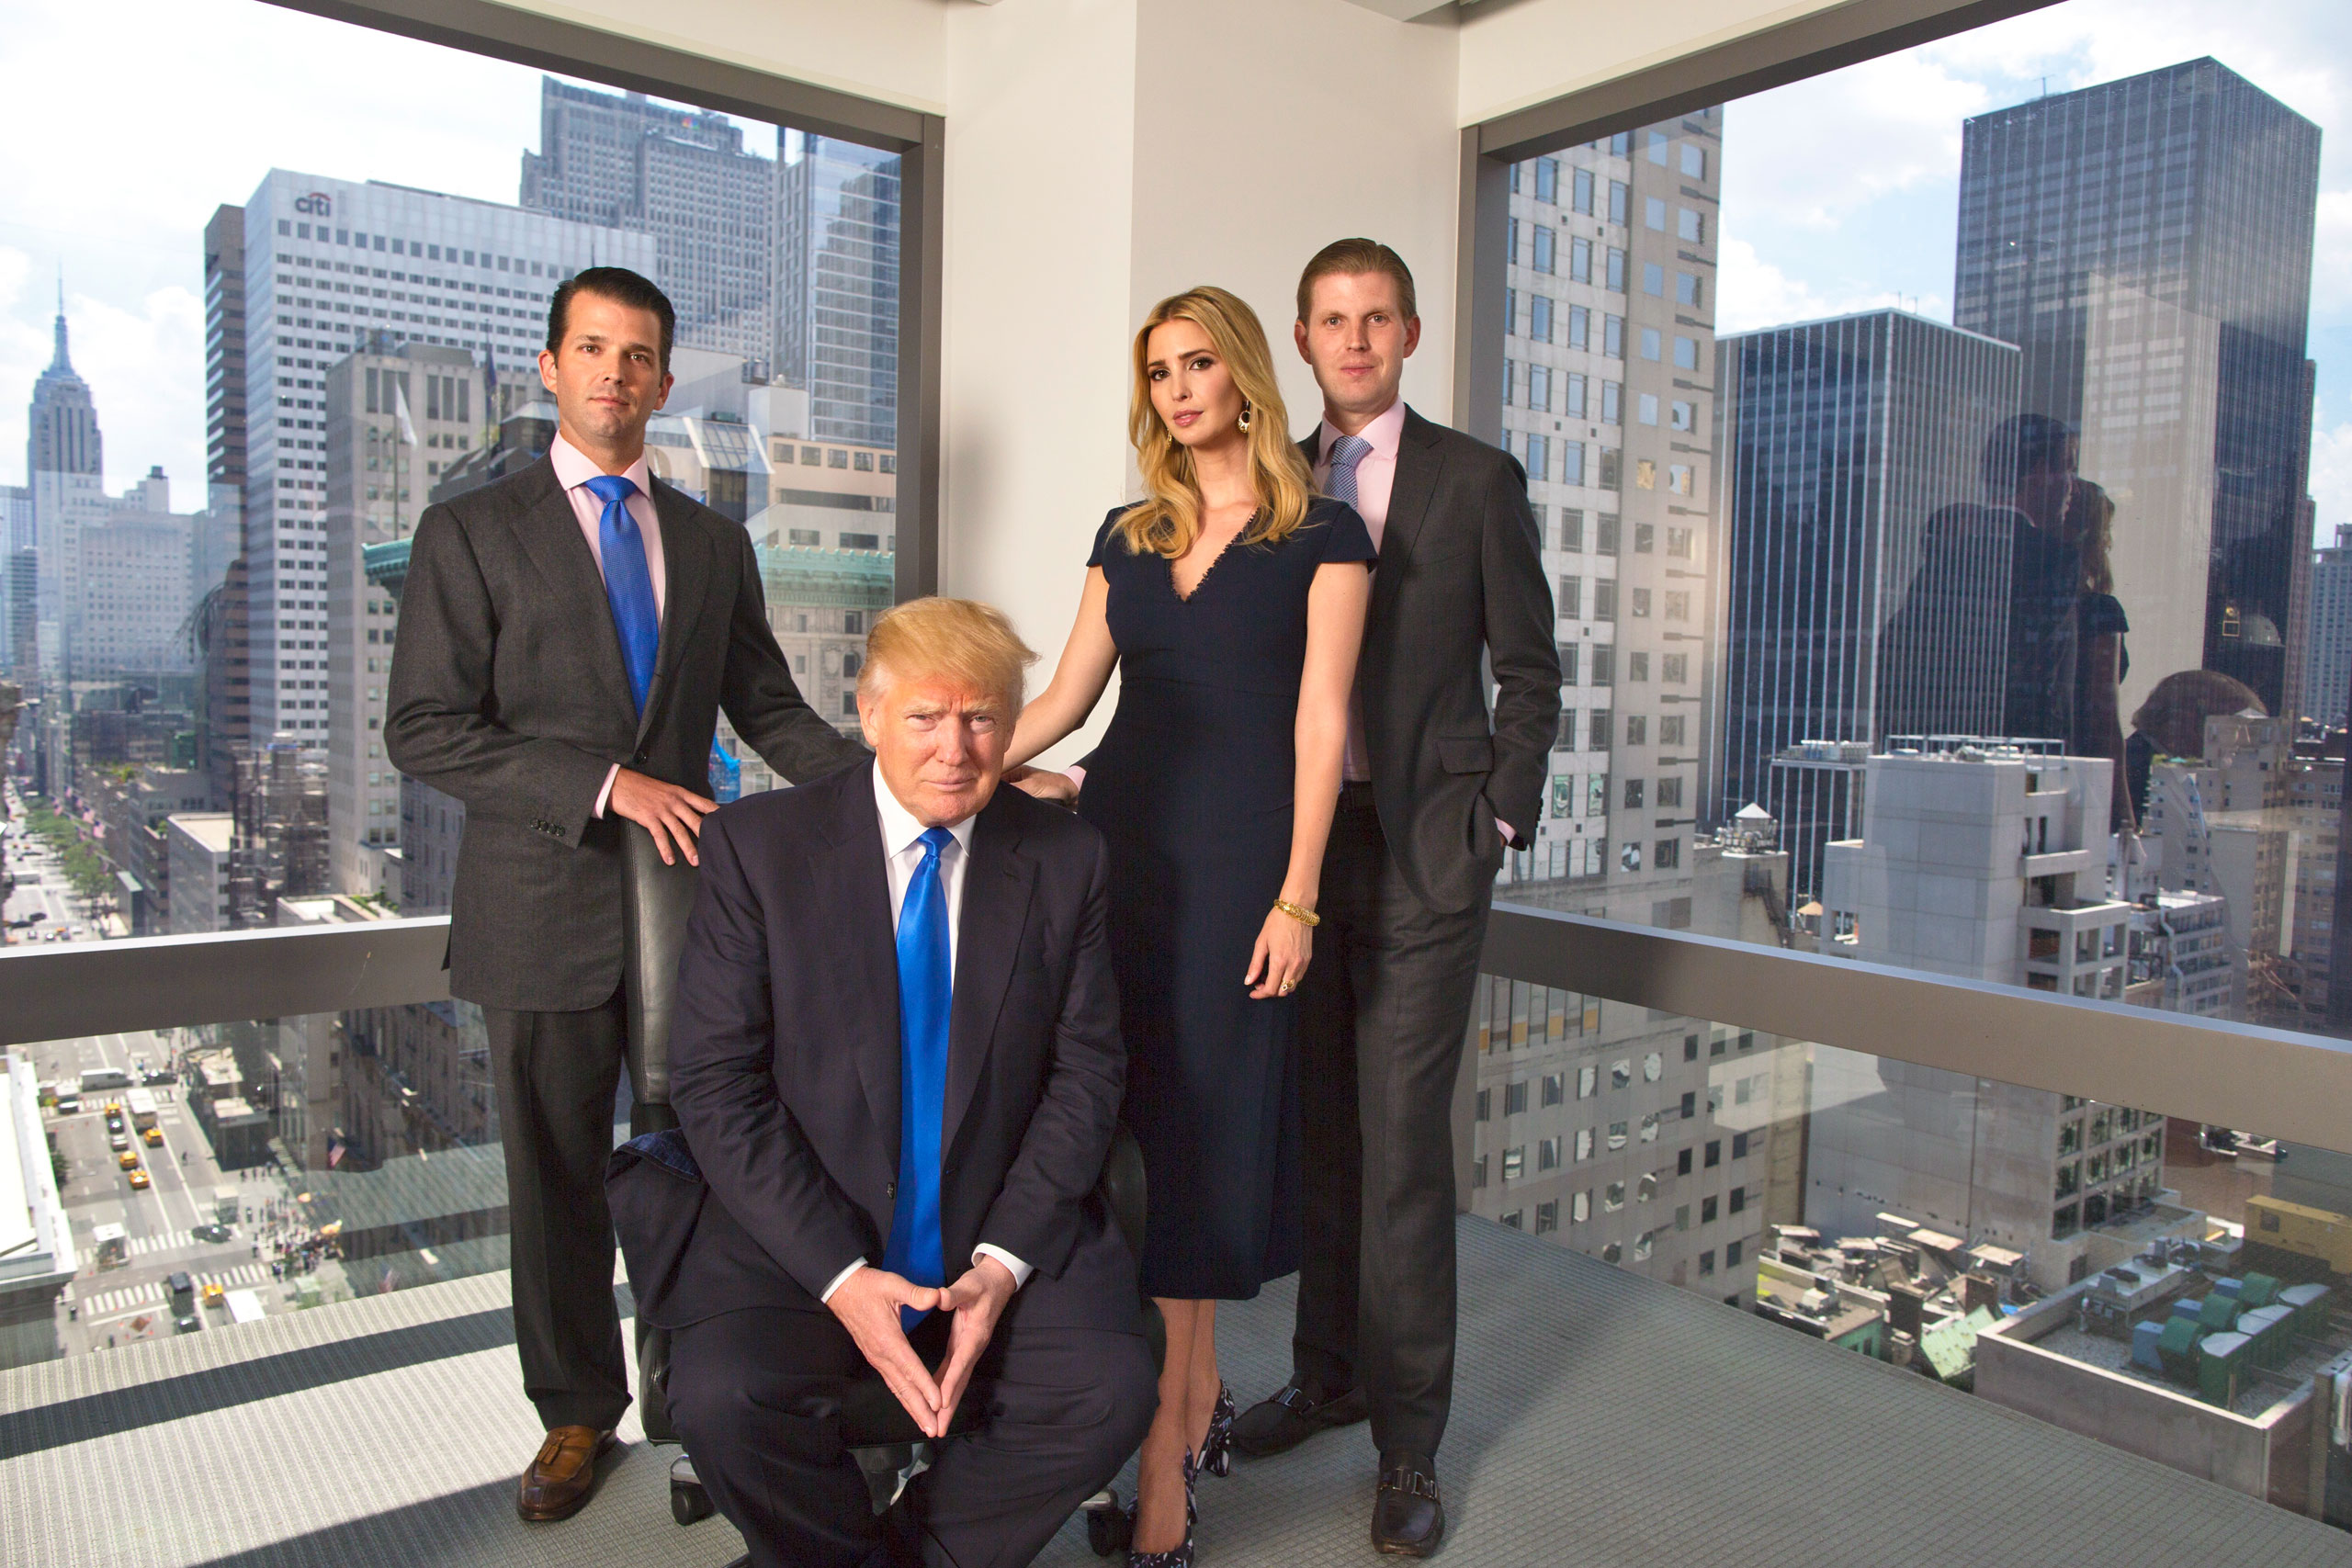 From left: Donald Jr., Ivanka and Eric Trump with their father on July 6 at Trump Tower in New York City (Harry Benson for TIME)